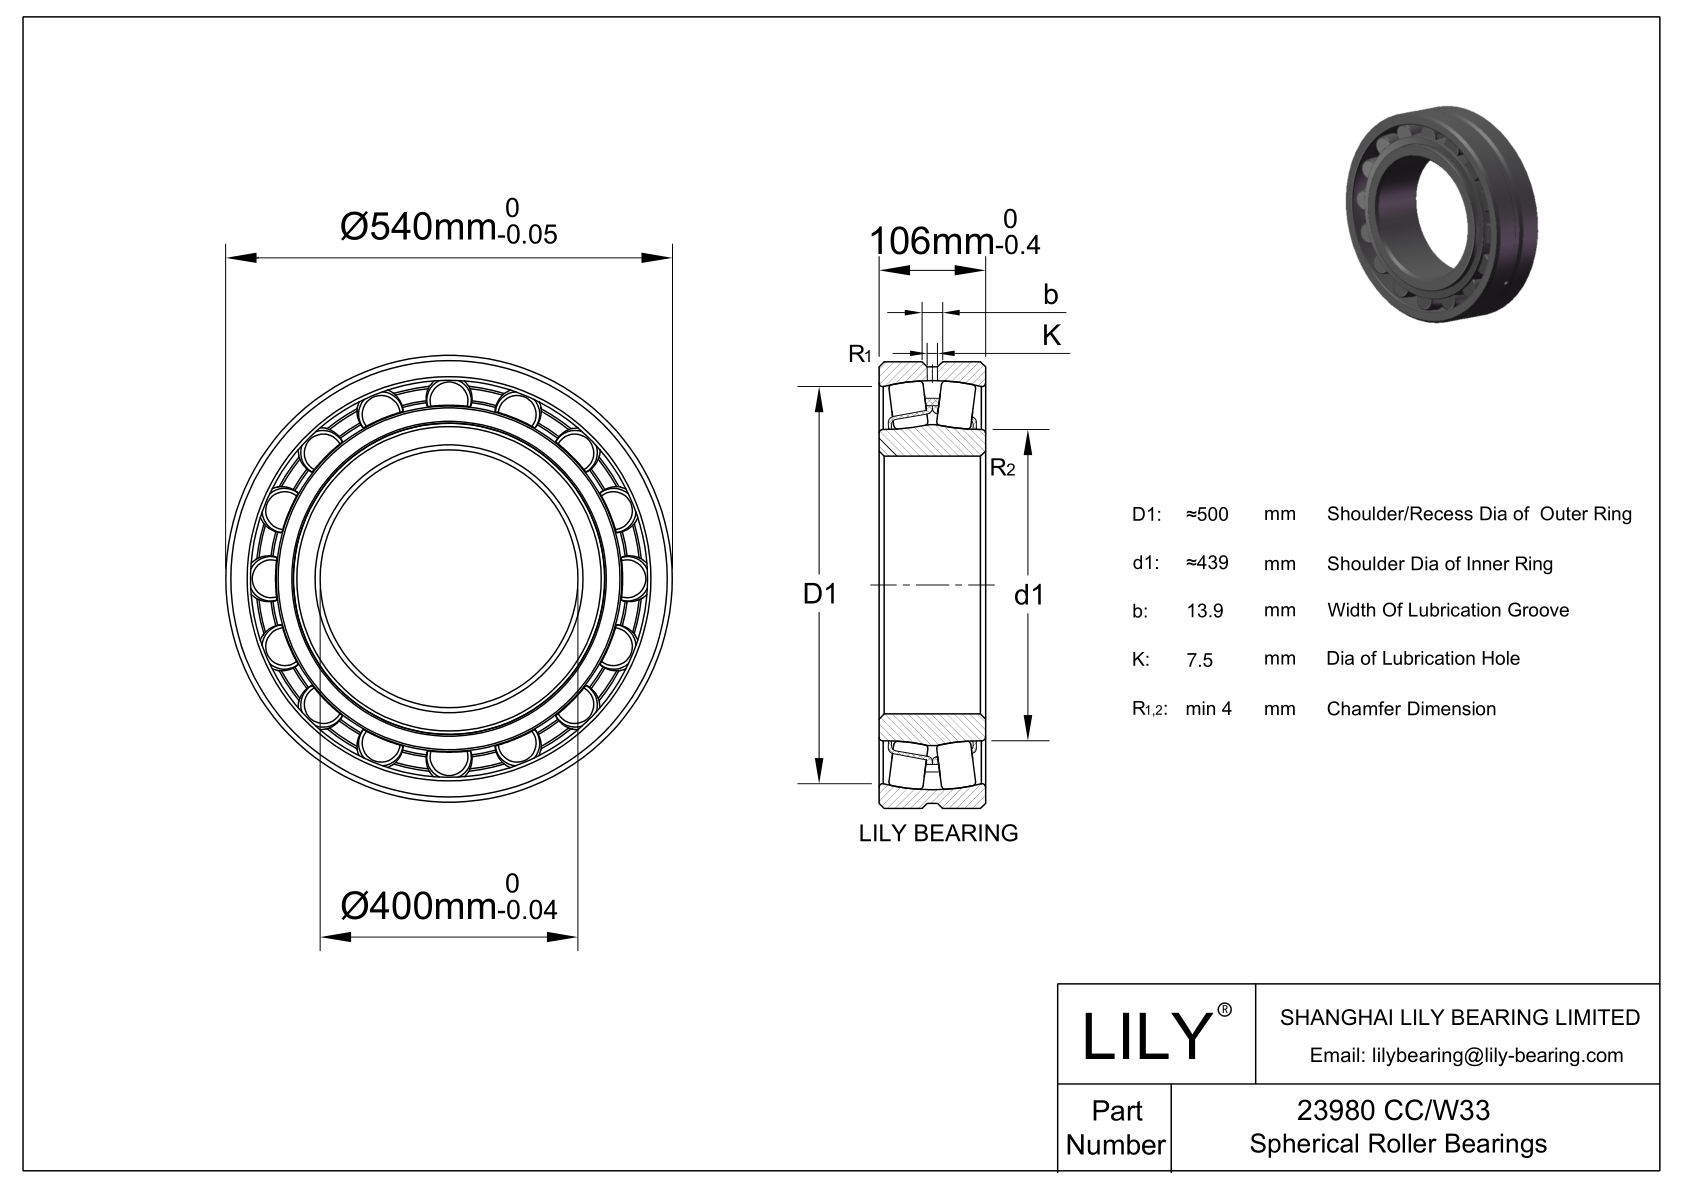 23980 CC/W33 Double Row Spherical Roller Bearing cad drawing